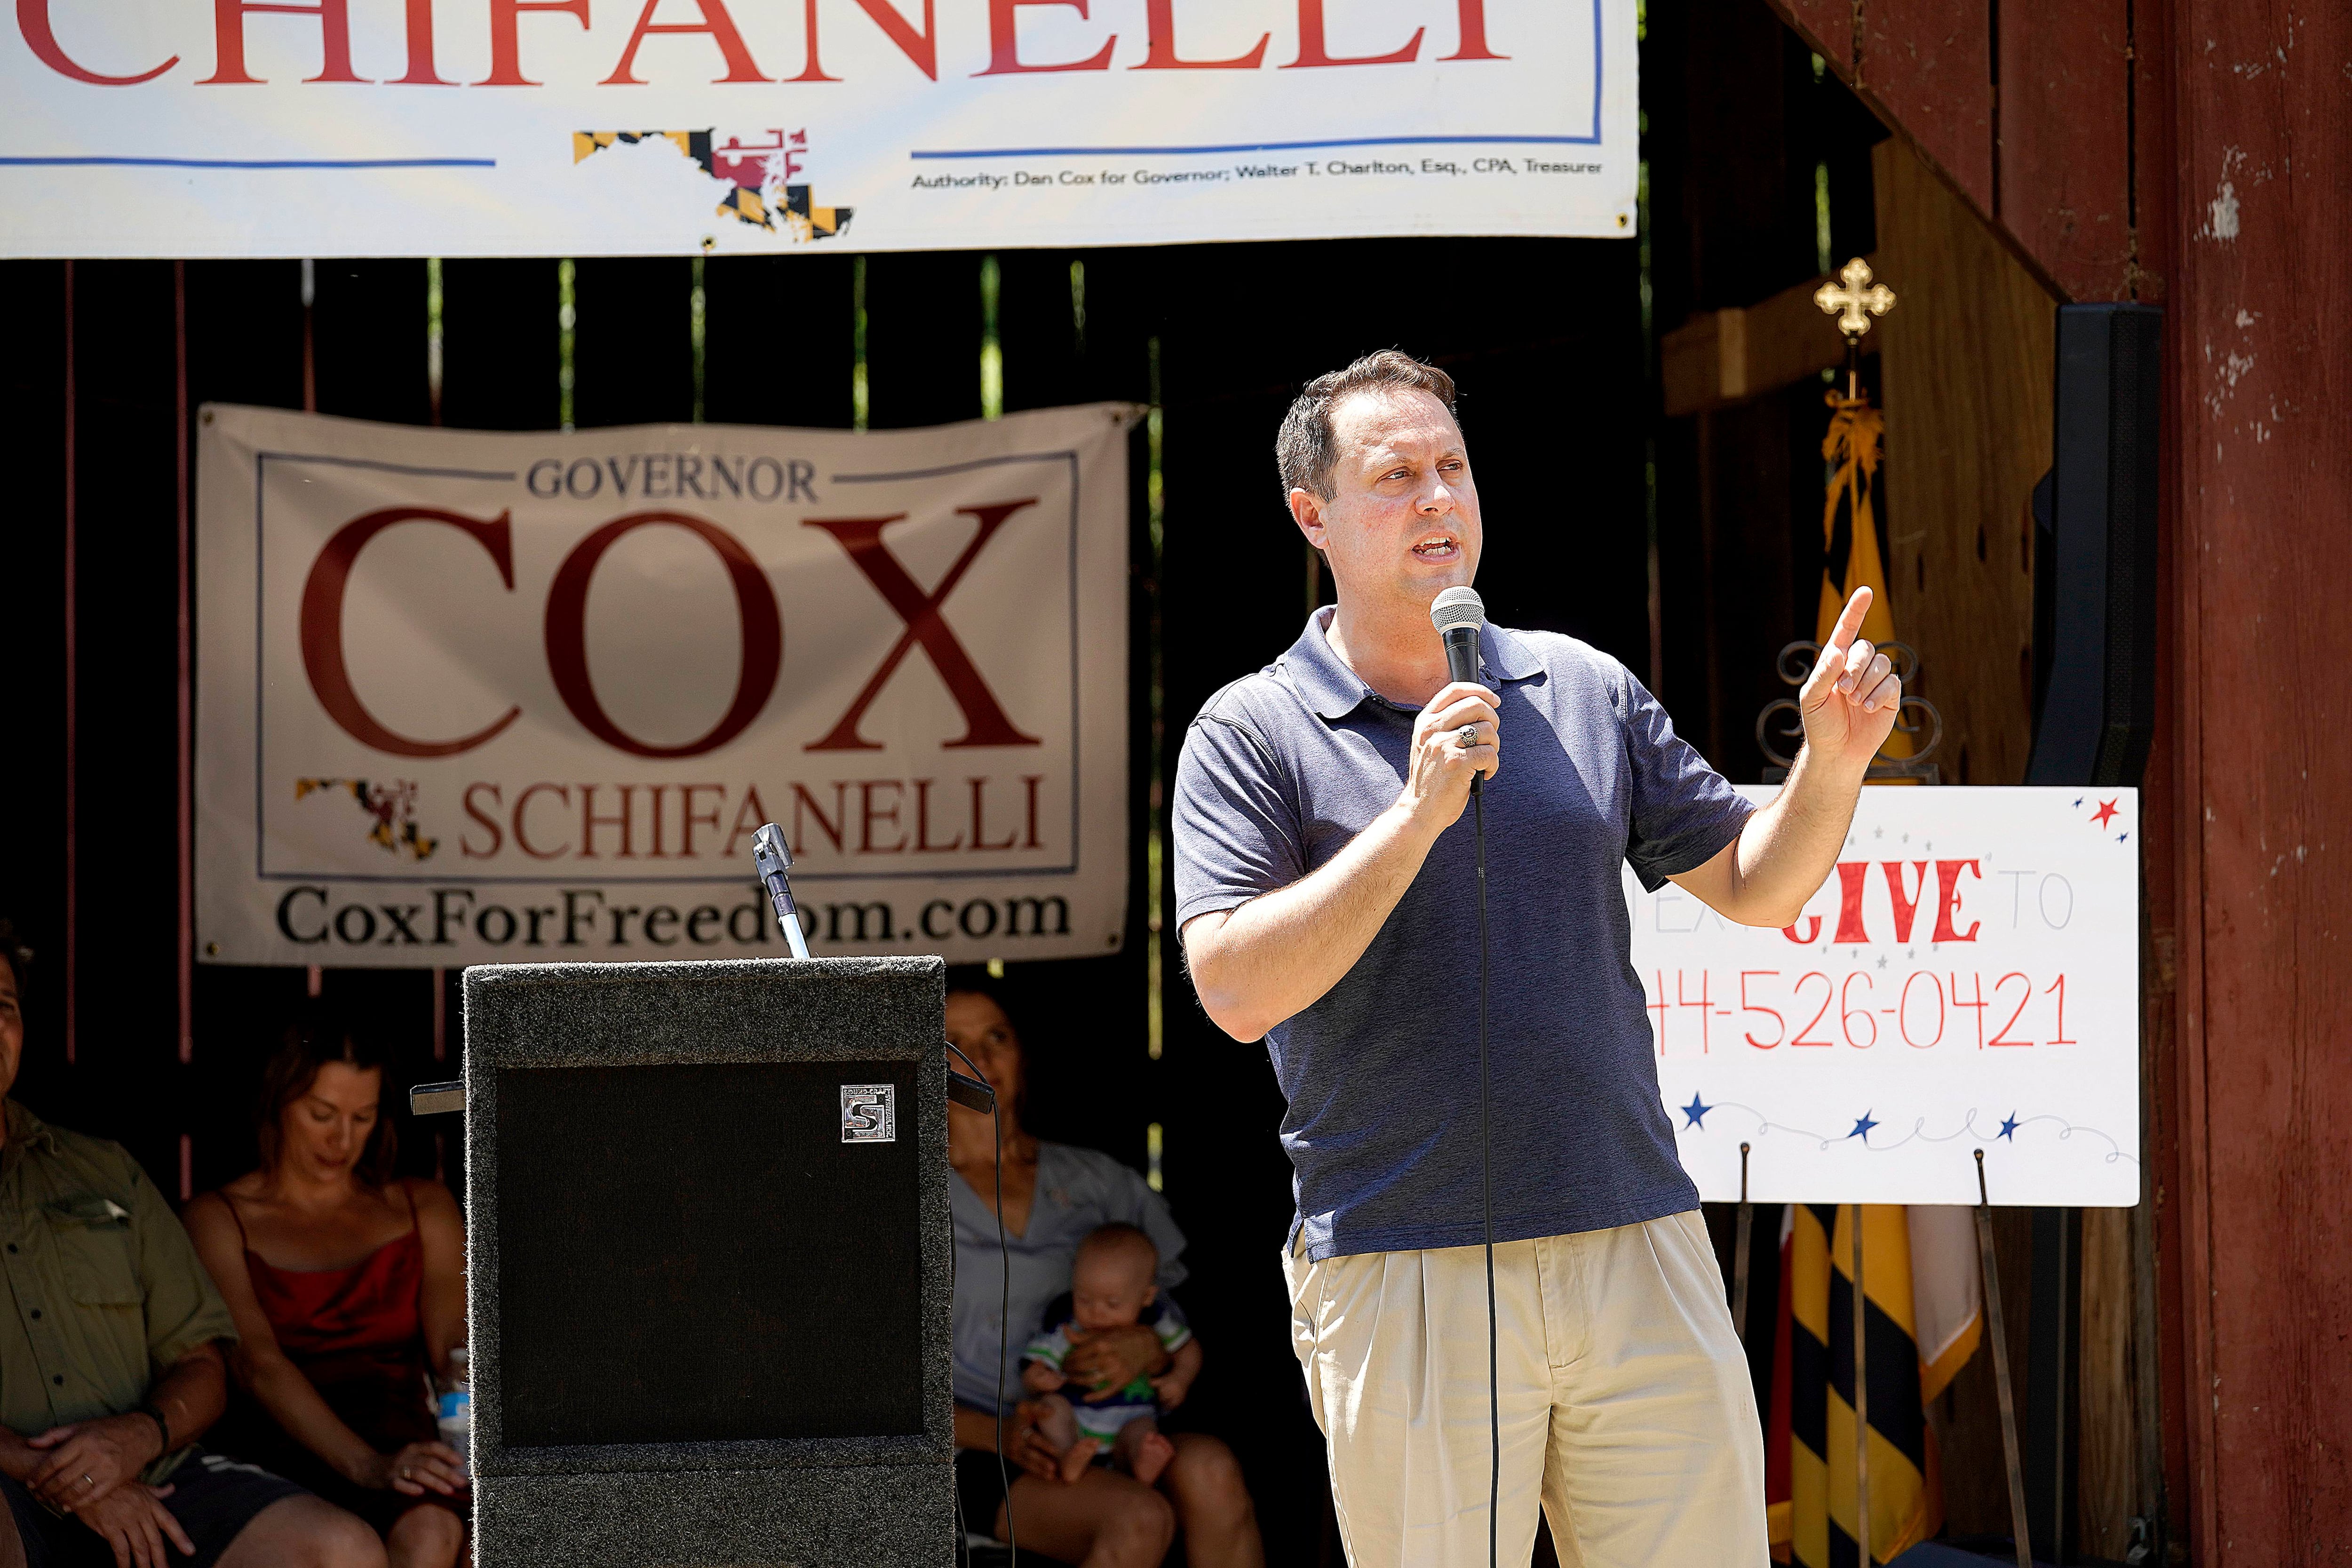 Dan Cox campaign held a "freedom rally" Saturday June 25th, on a farm in Hampstead with Pennsylvania Republican primary for governor candidate, Doug Mastriano as the keynote.  In addition to Mastriano and Cox, speakers at the event will include Gordana Schifanelli, Cox’s candidate for lieutenant governor and others.